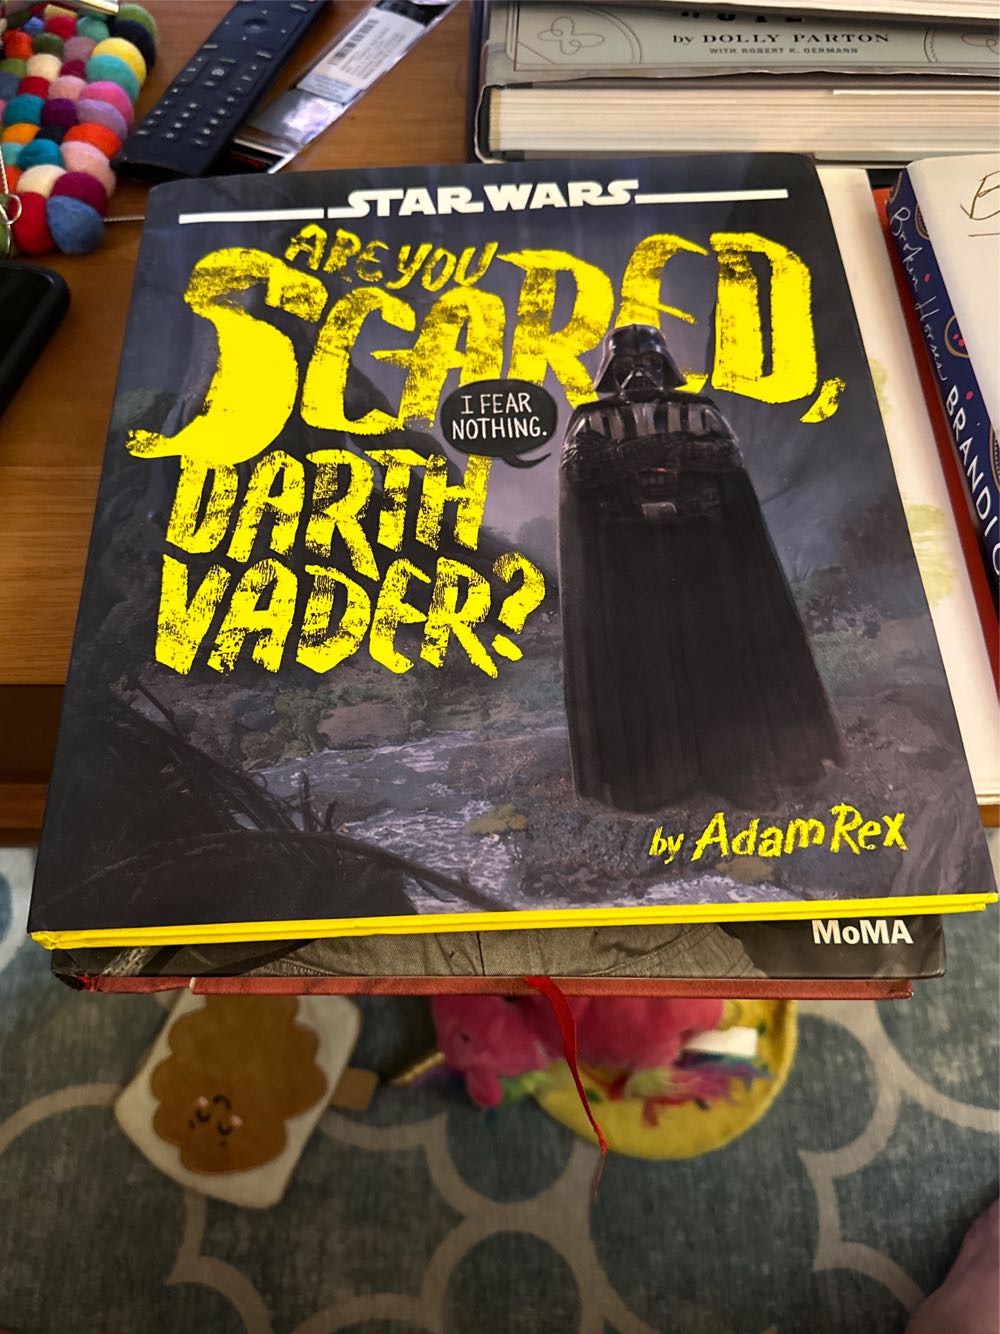 Are You Scared, Darth Vader? (Star Wars) - Adam Rex (Disney Lucasfilm Press - Hardcover) book collectible [Barcode 9781484704974] - Main Image 1